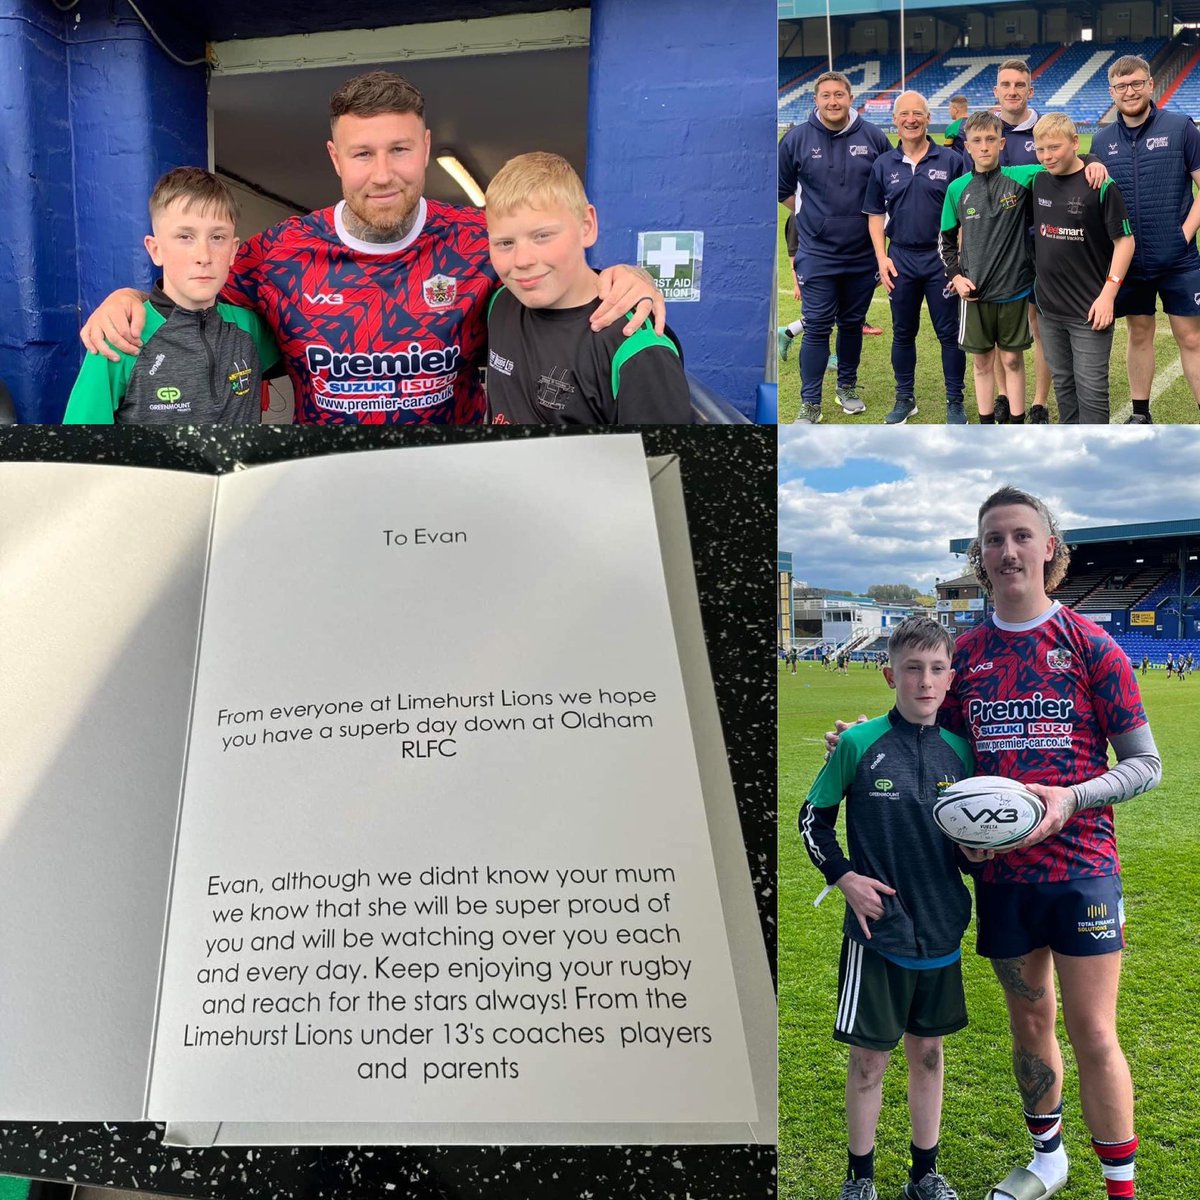 Wow! What a brilliant day Sunday was. Evan we hope you and your family had the most amazing day! We can’t thank the Oldham community enough for the welcome they gave to Evan, it really did show that we are #StrongerTogether!